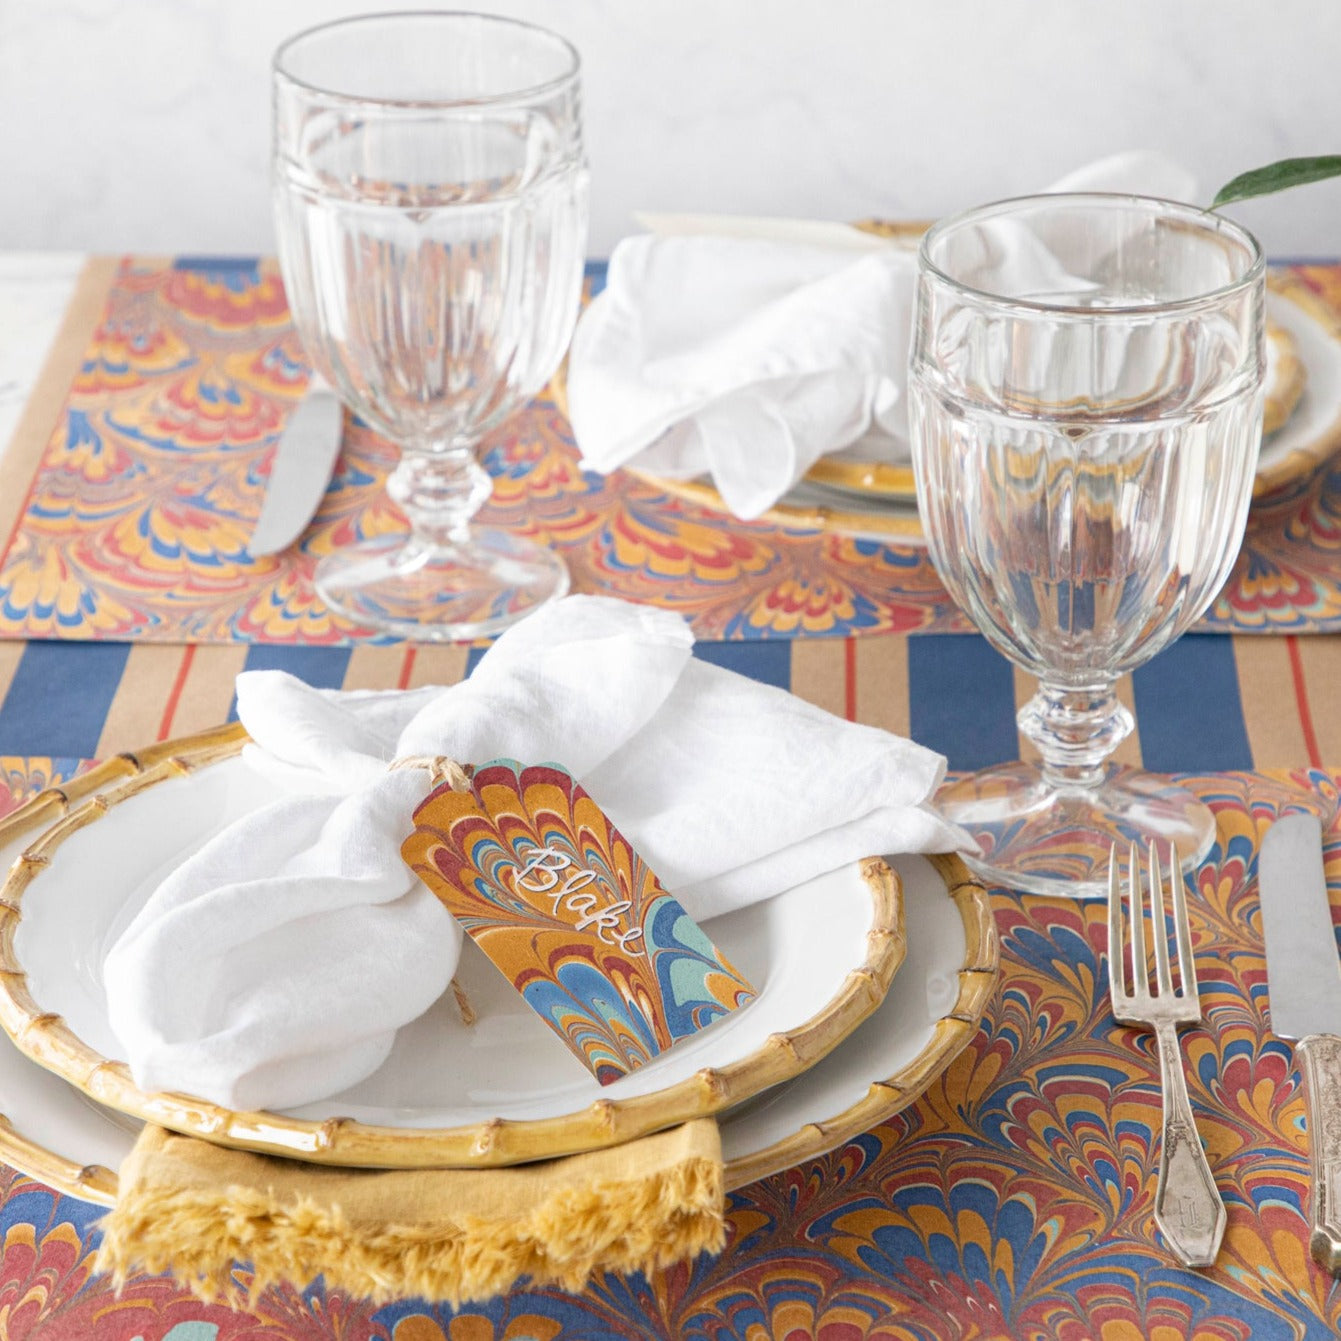 The Red &amp; Blue Peacock Marbled Placemat under an elegant table setting for two.